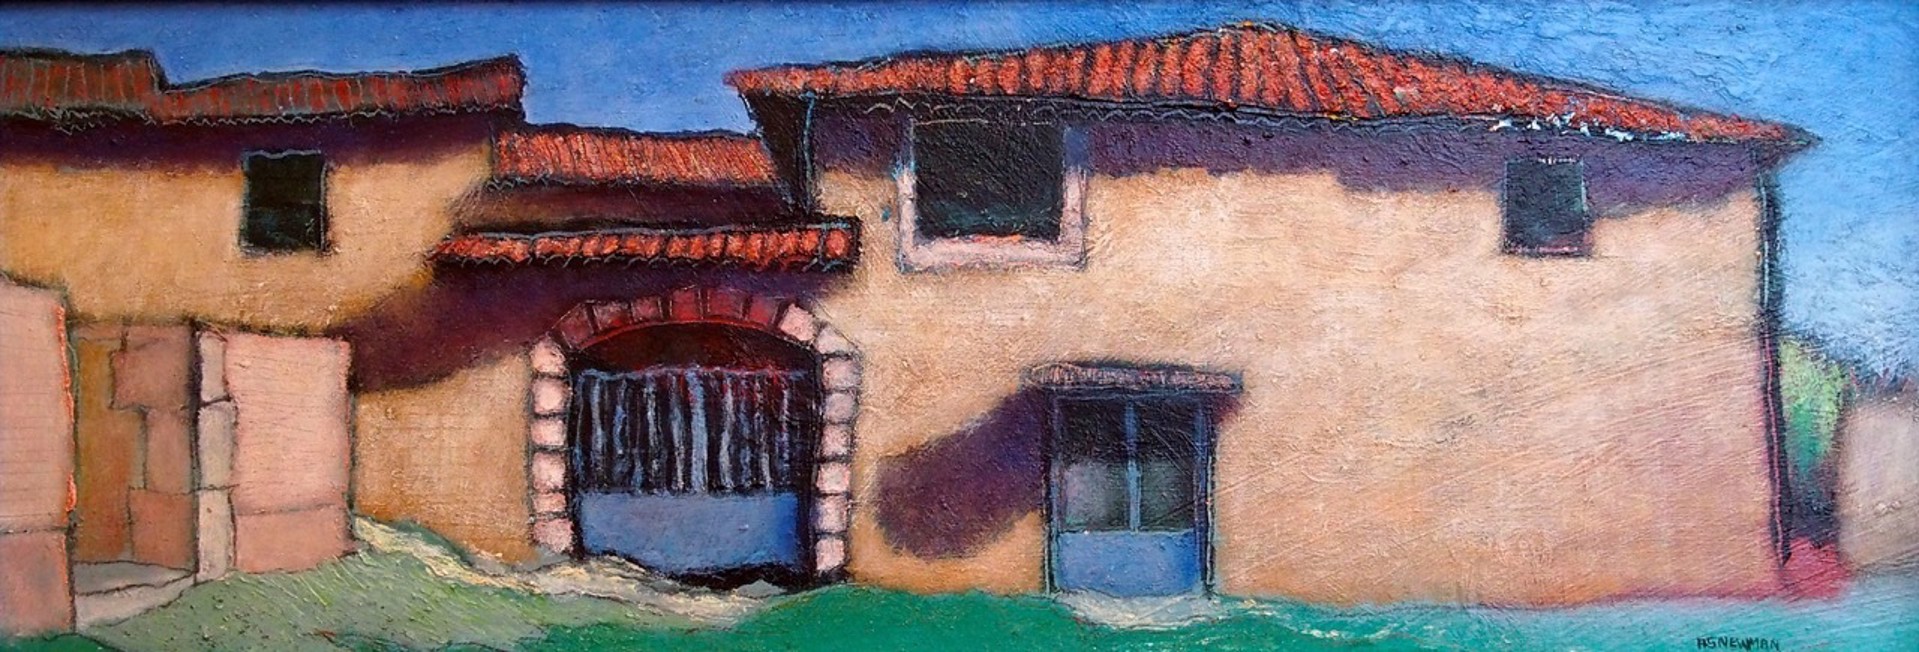 Long House (Vallerargues) by Andy Newman